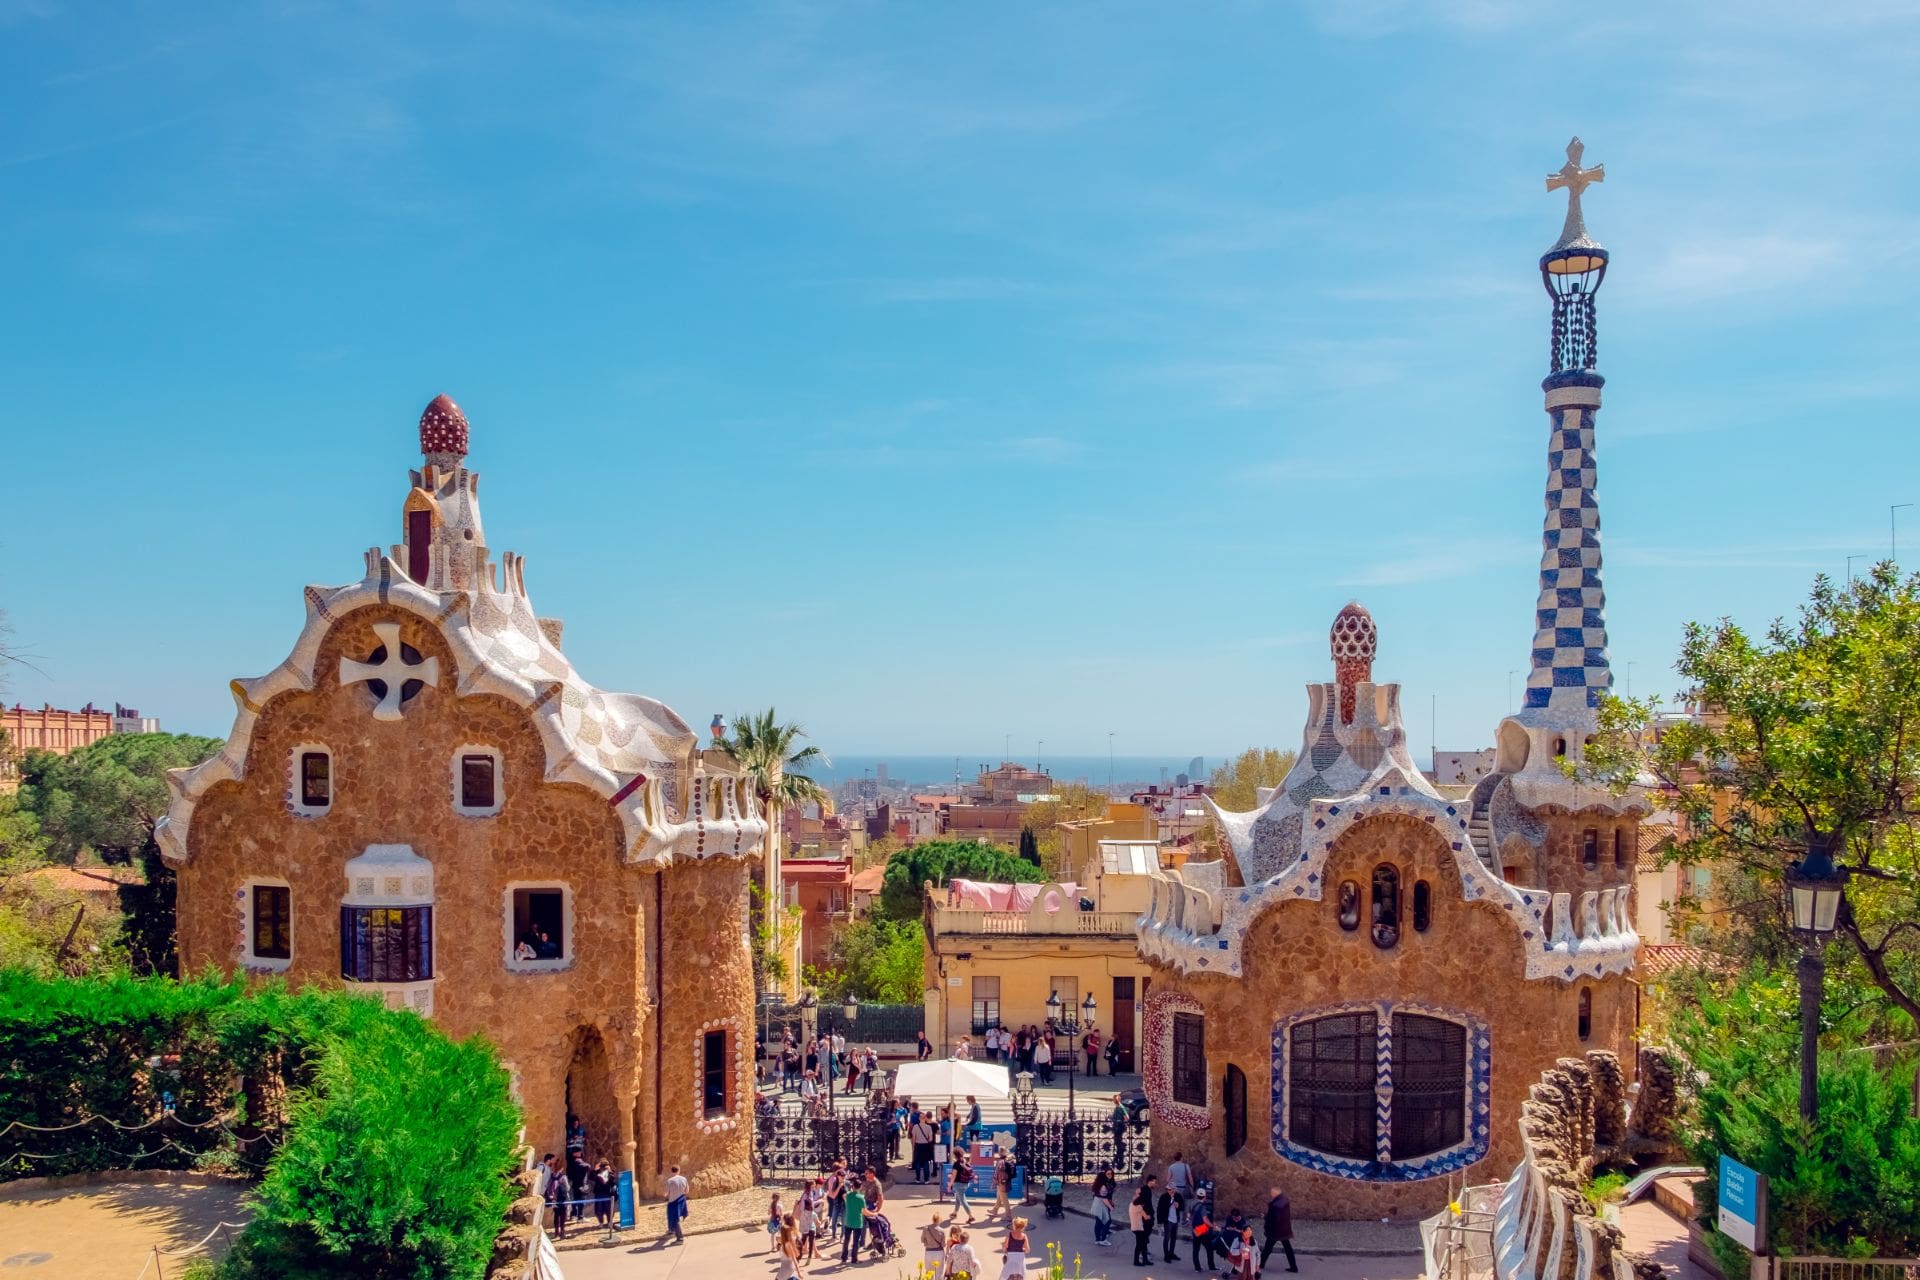 summers-day-in-a-european-city-with-colourful-gaudi-architecture-parc-guell-park-guell-two-days-in-barcelona